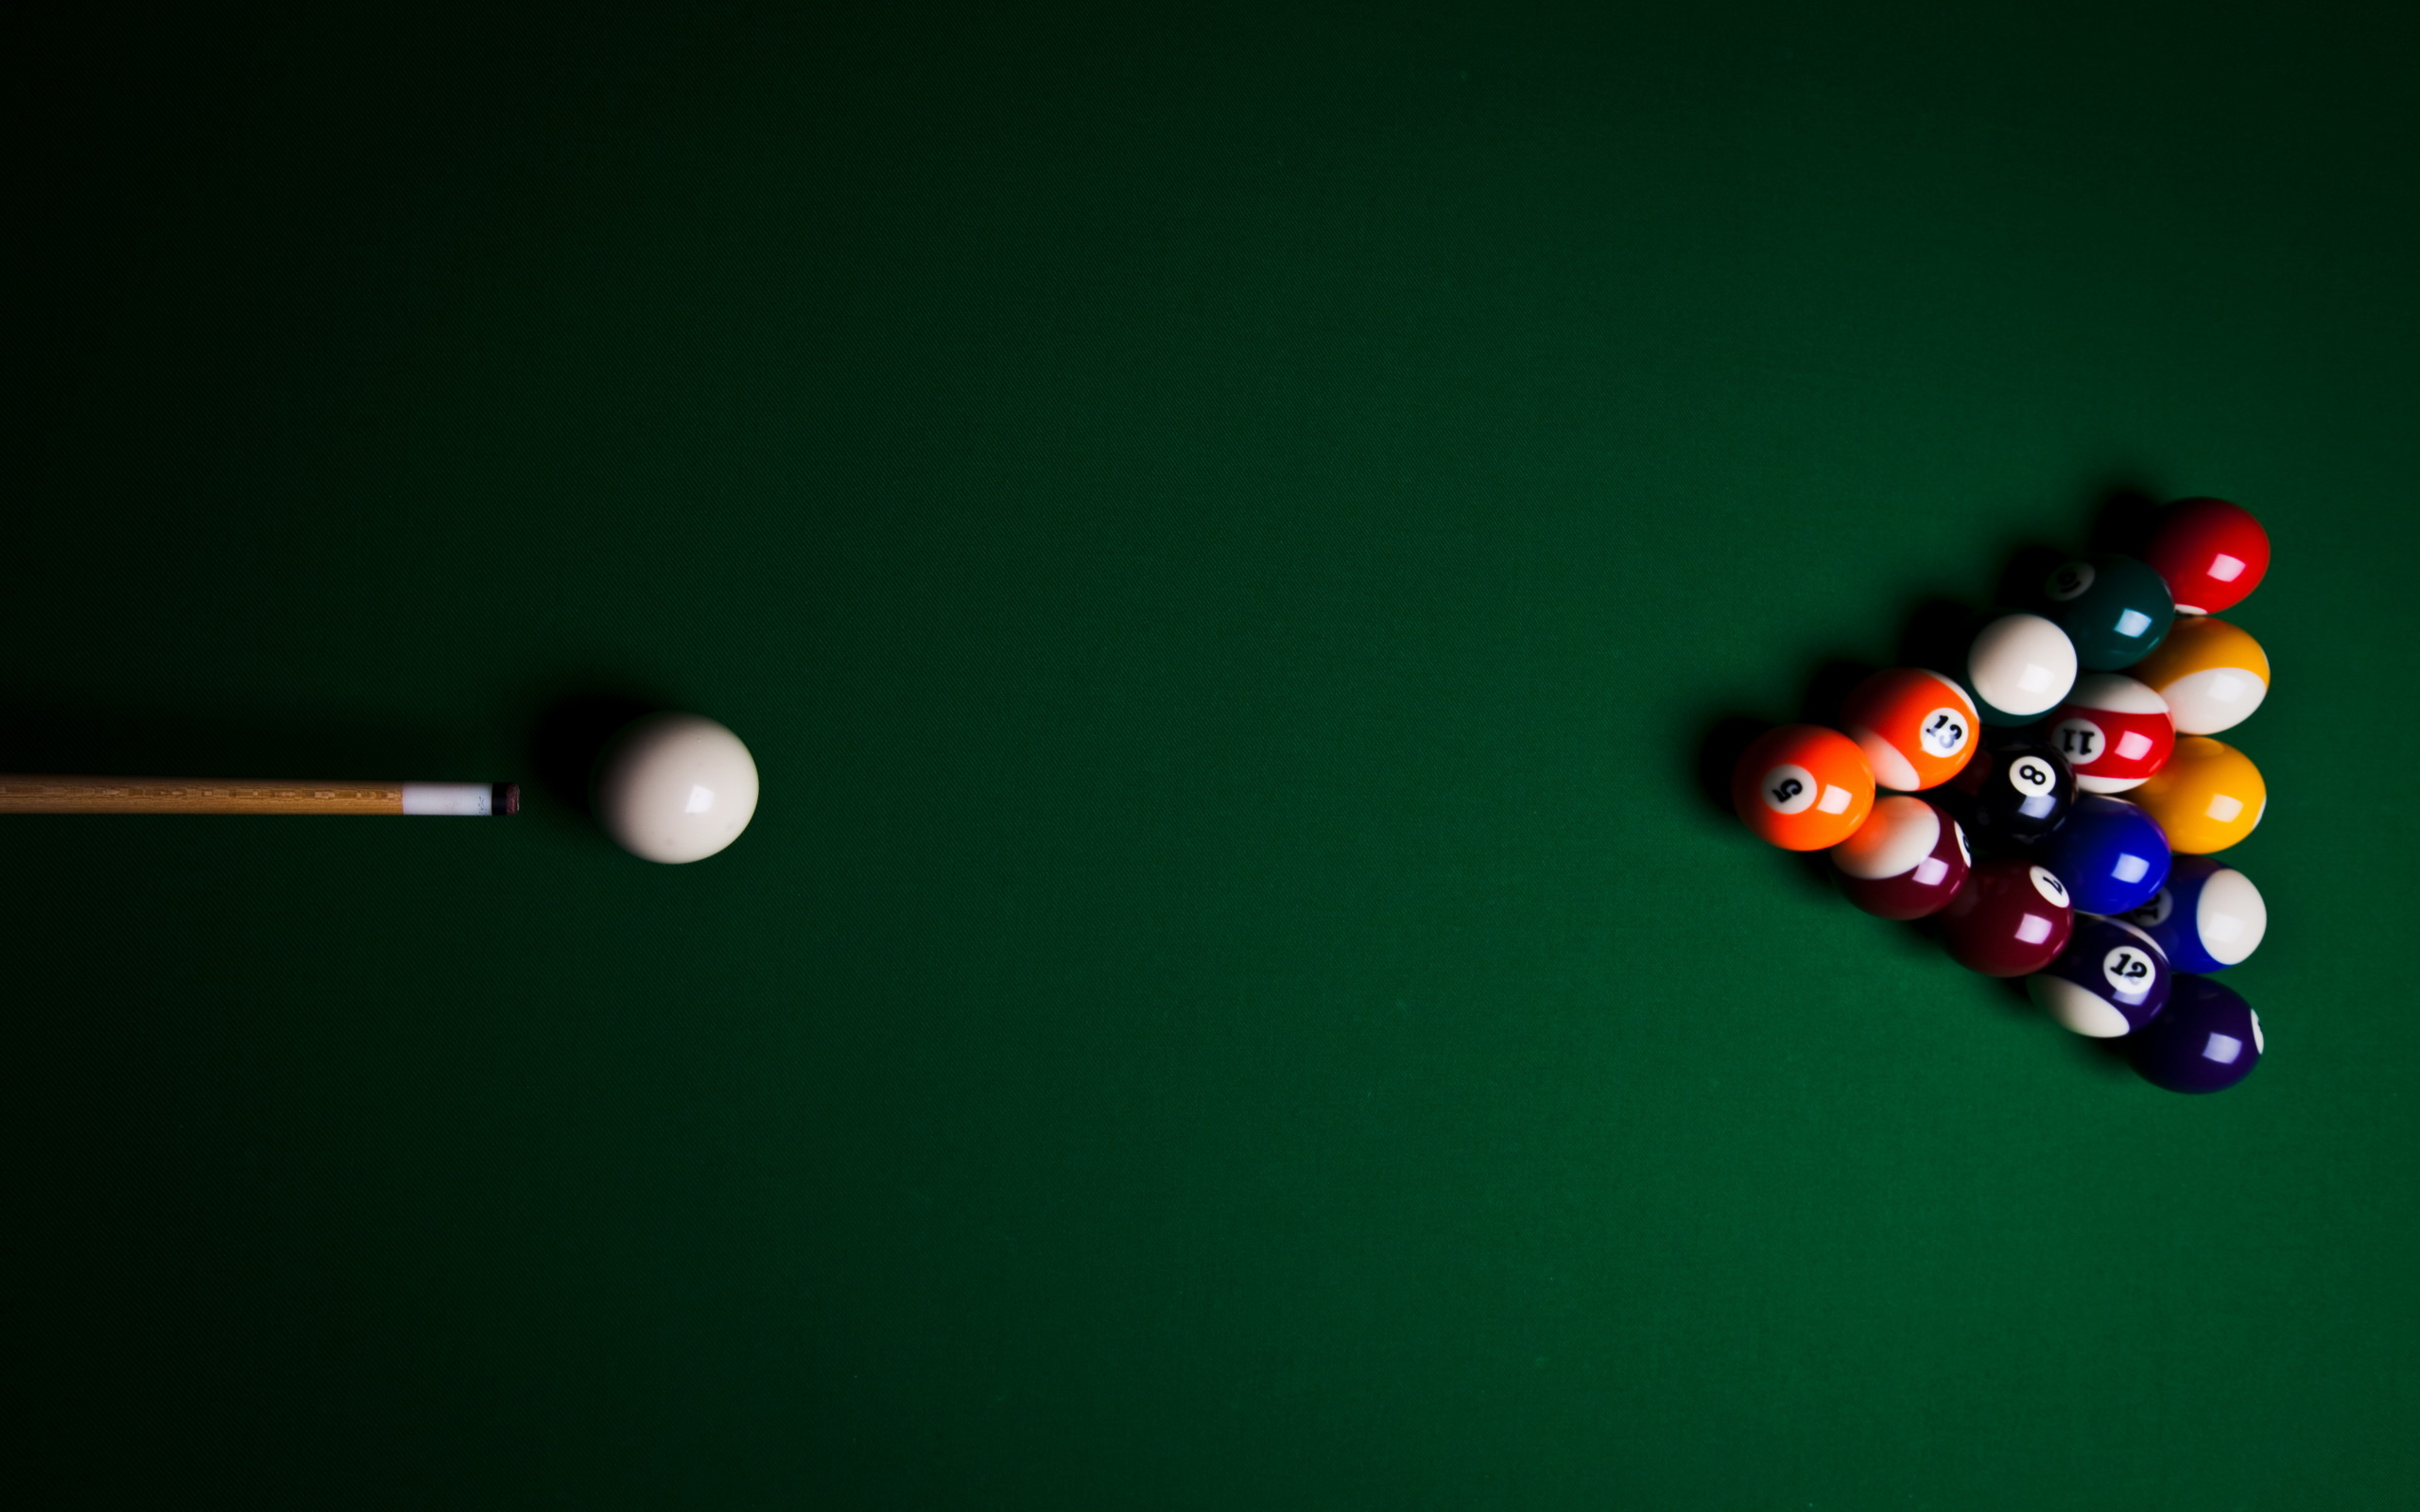 Pool (Cue Sports): The moment before a break shot, Starting point of an eight-ball game. 2560x1600 HD Background.